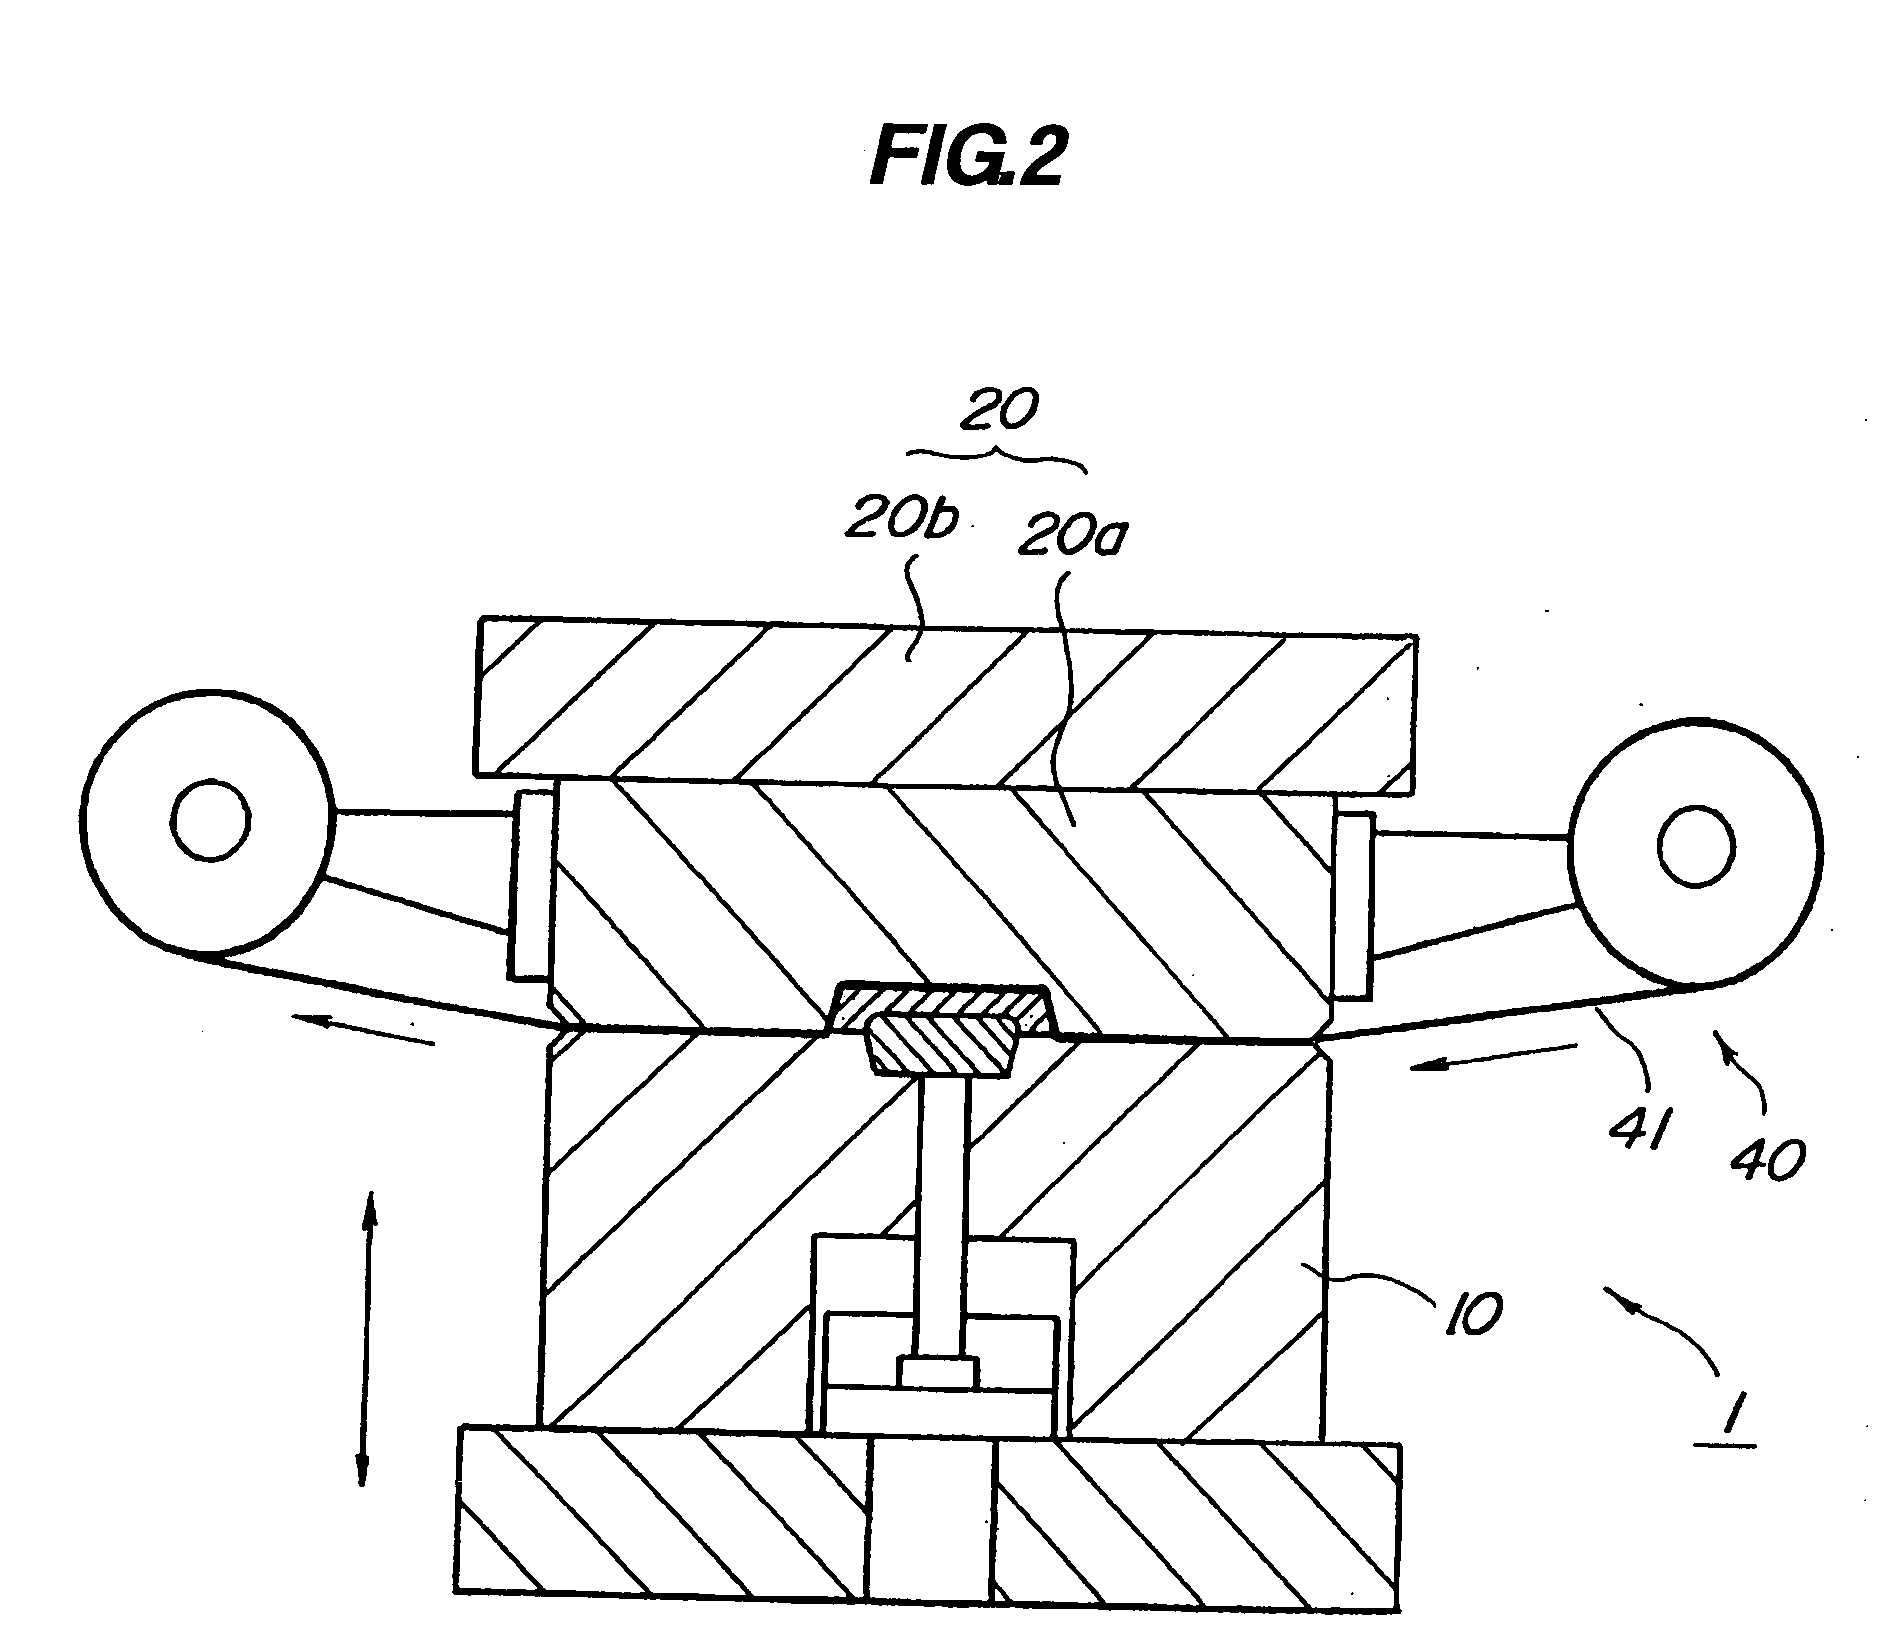 Method of manufacturing resin molded product